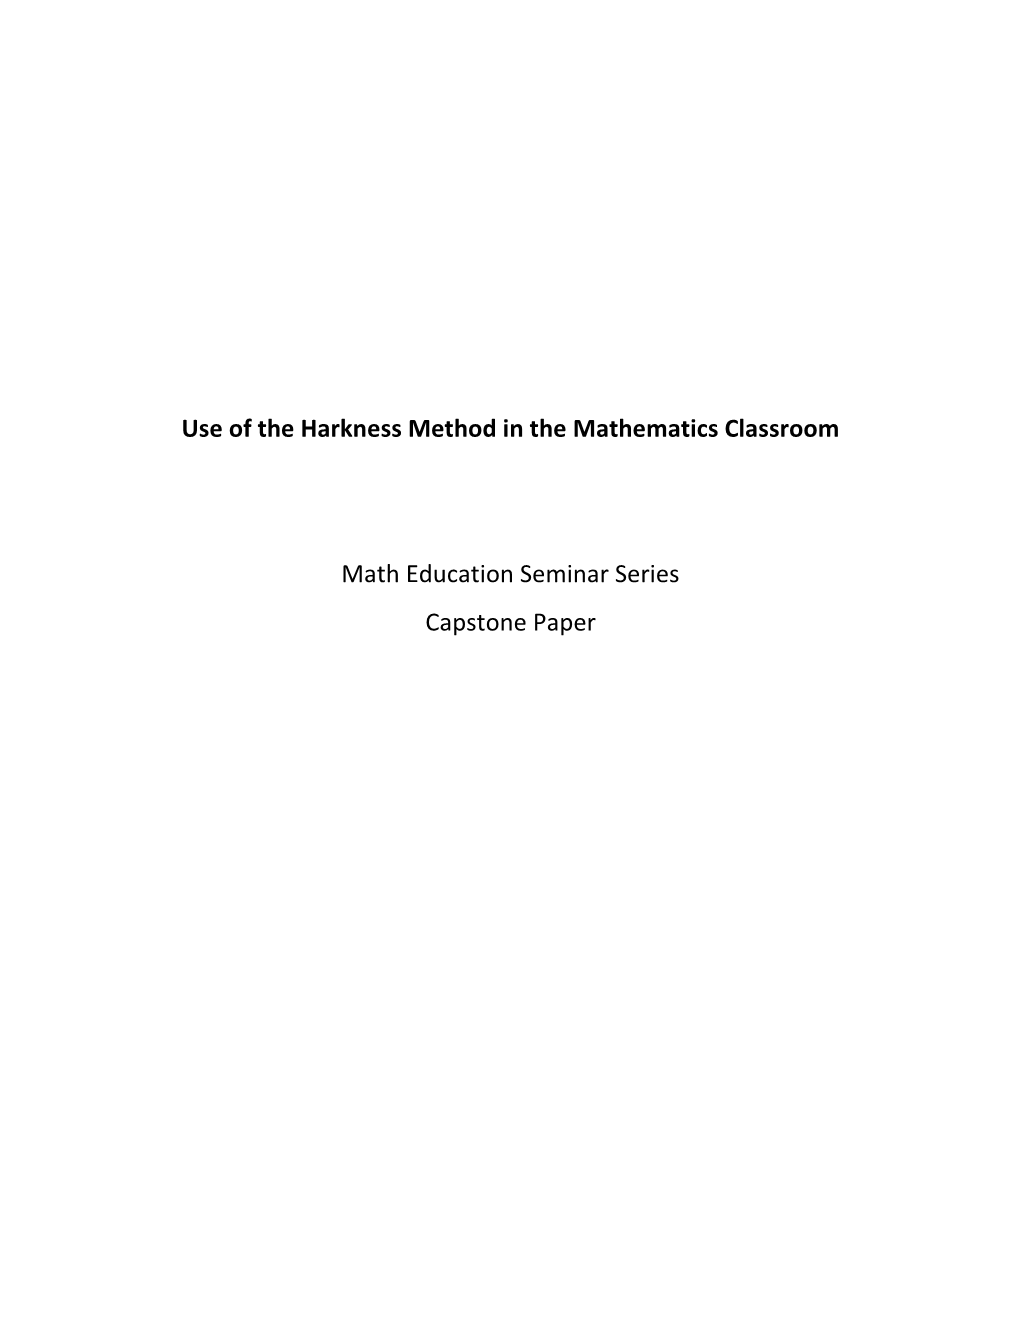 Use of the Harkness Method in the Mathematics Classroom